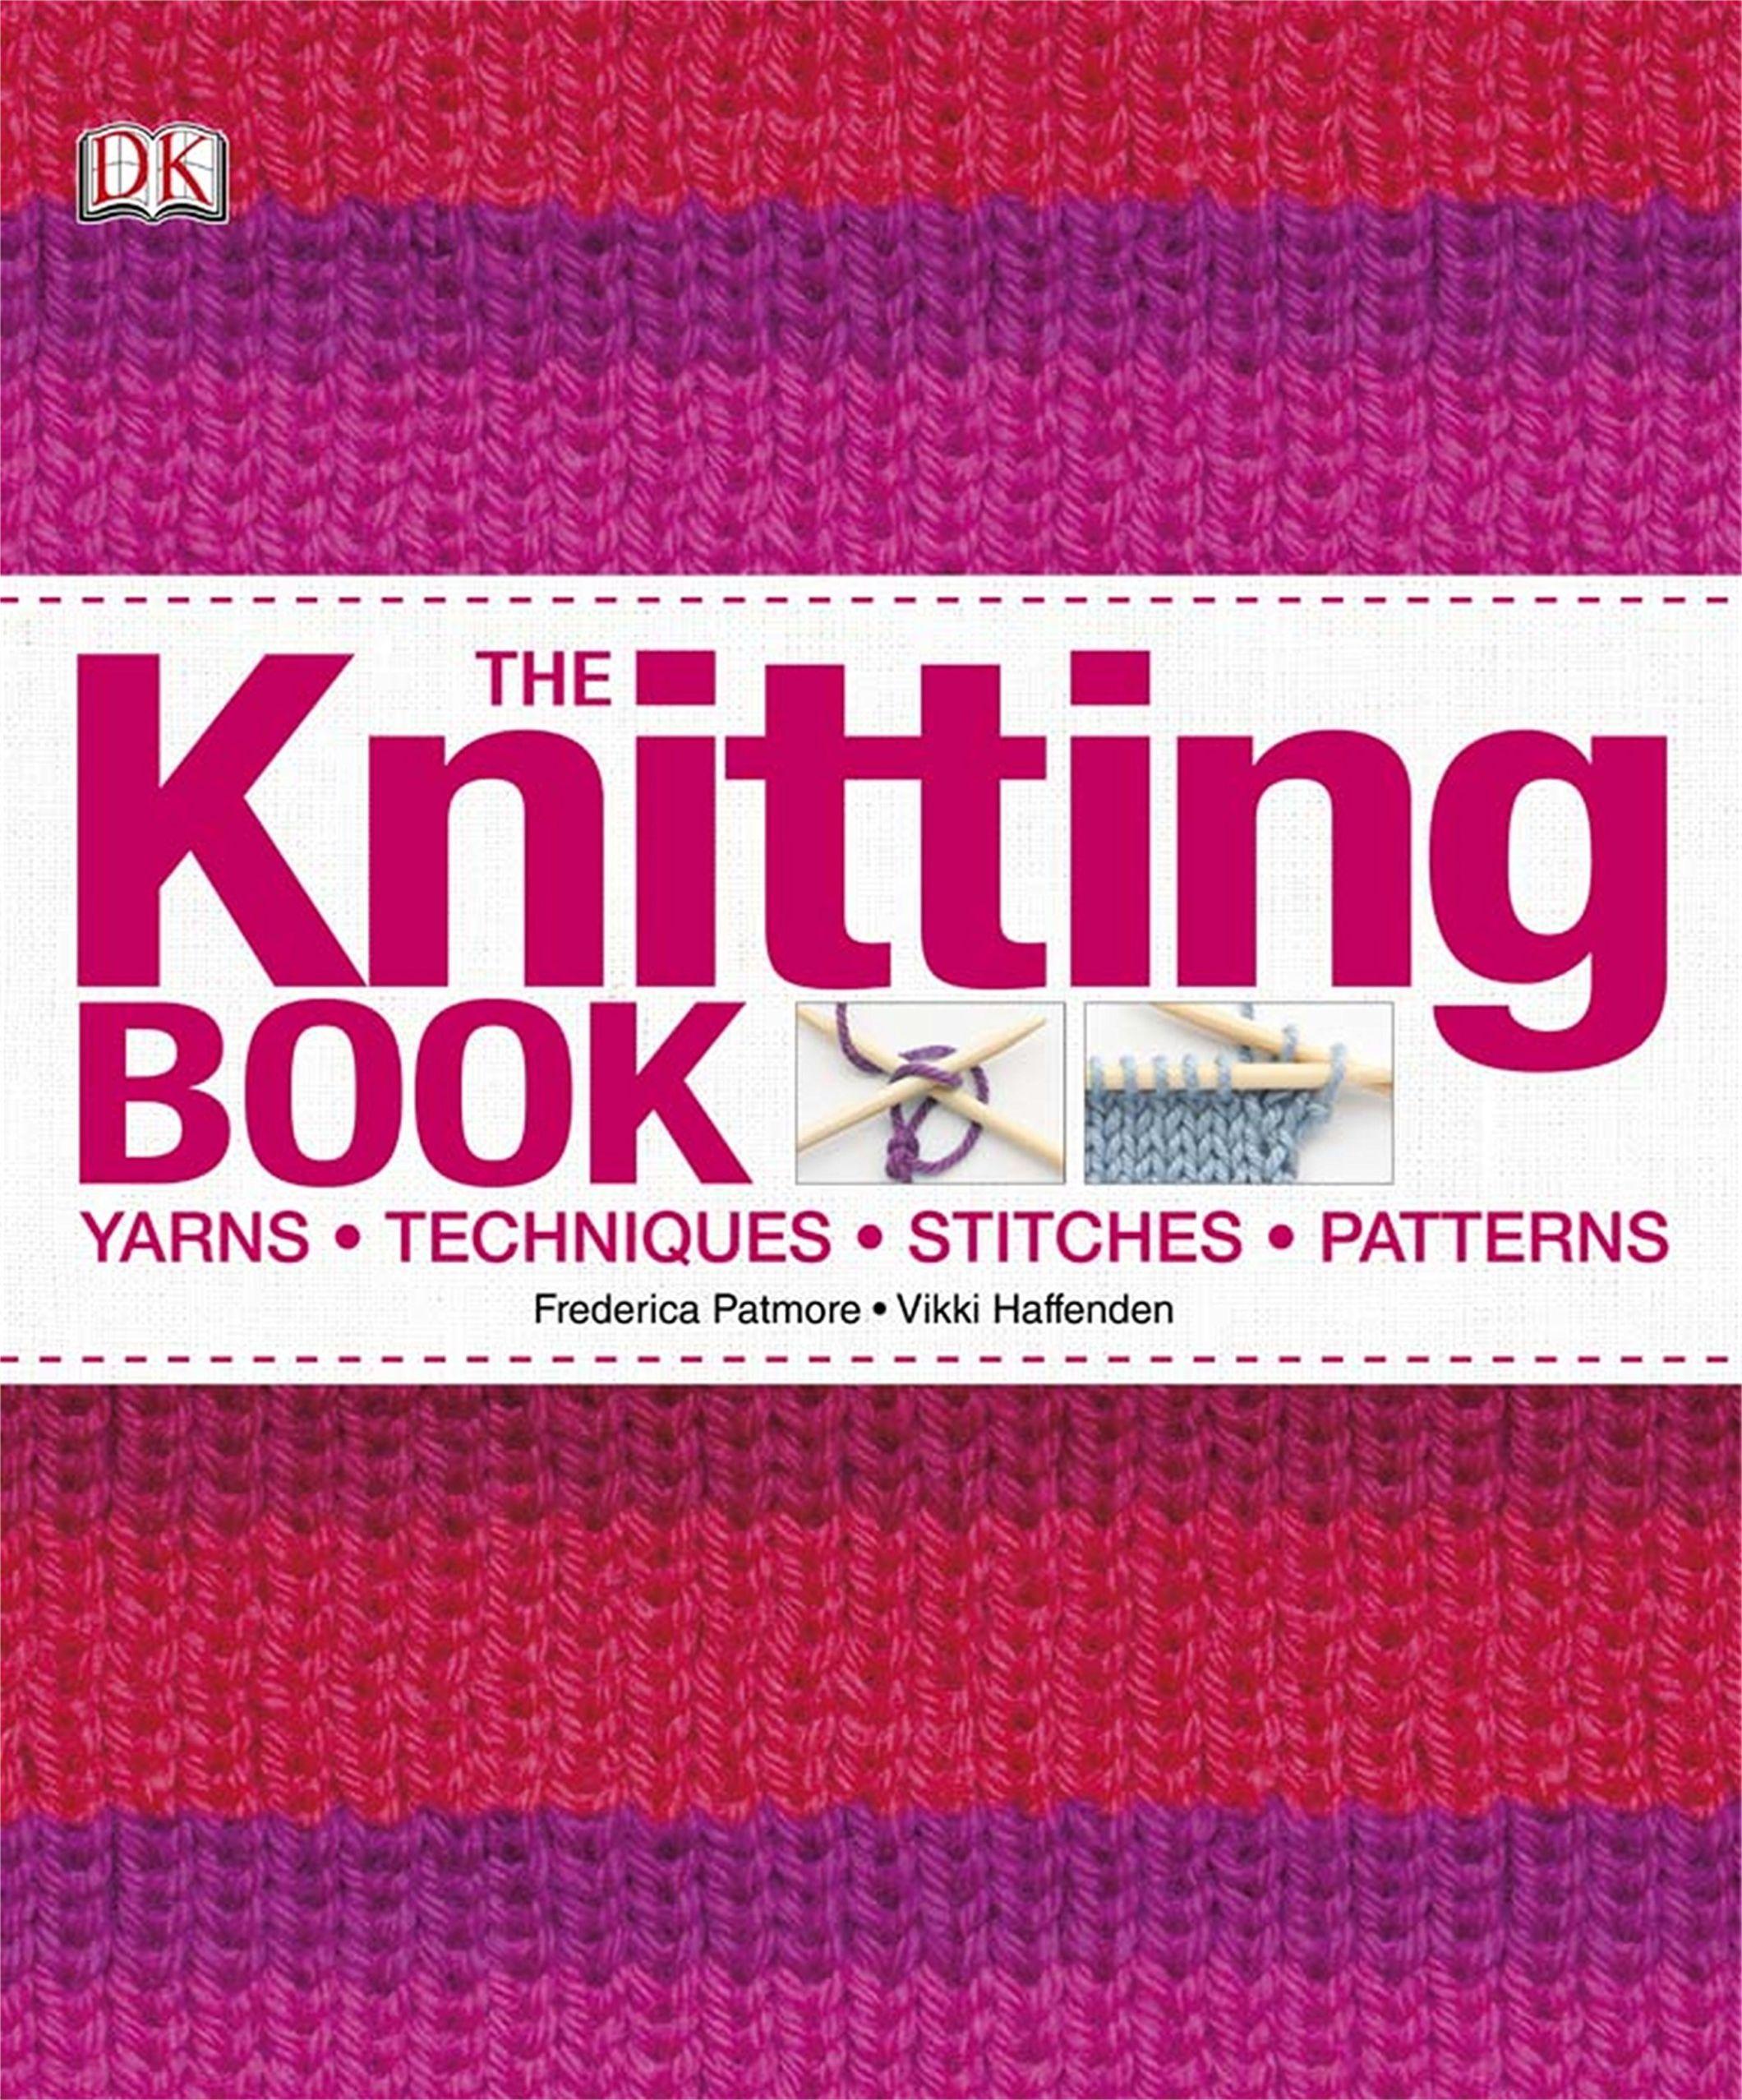 Knitting Book: Yarns, Techniques, Stitches, Patterns